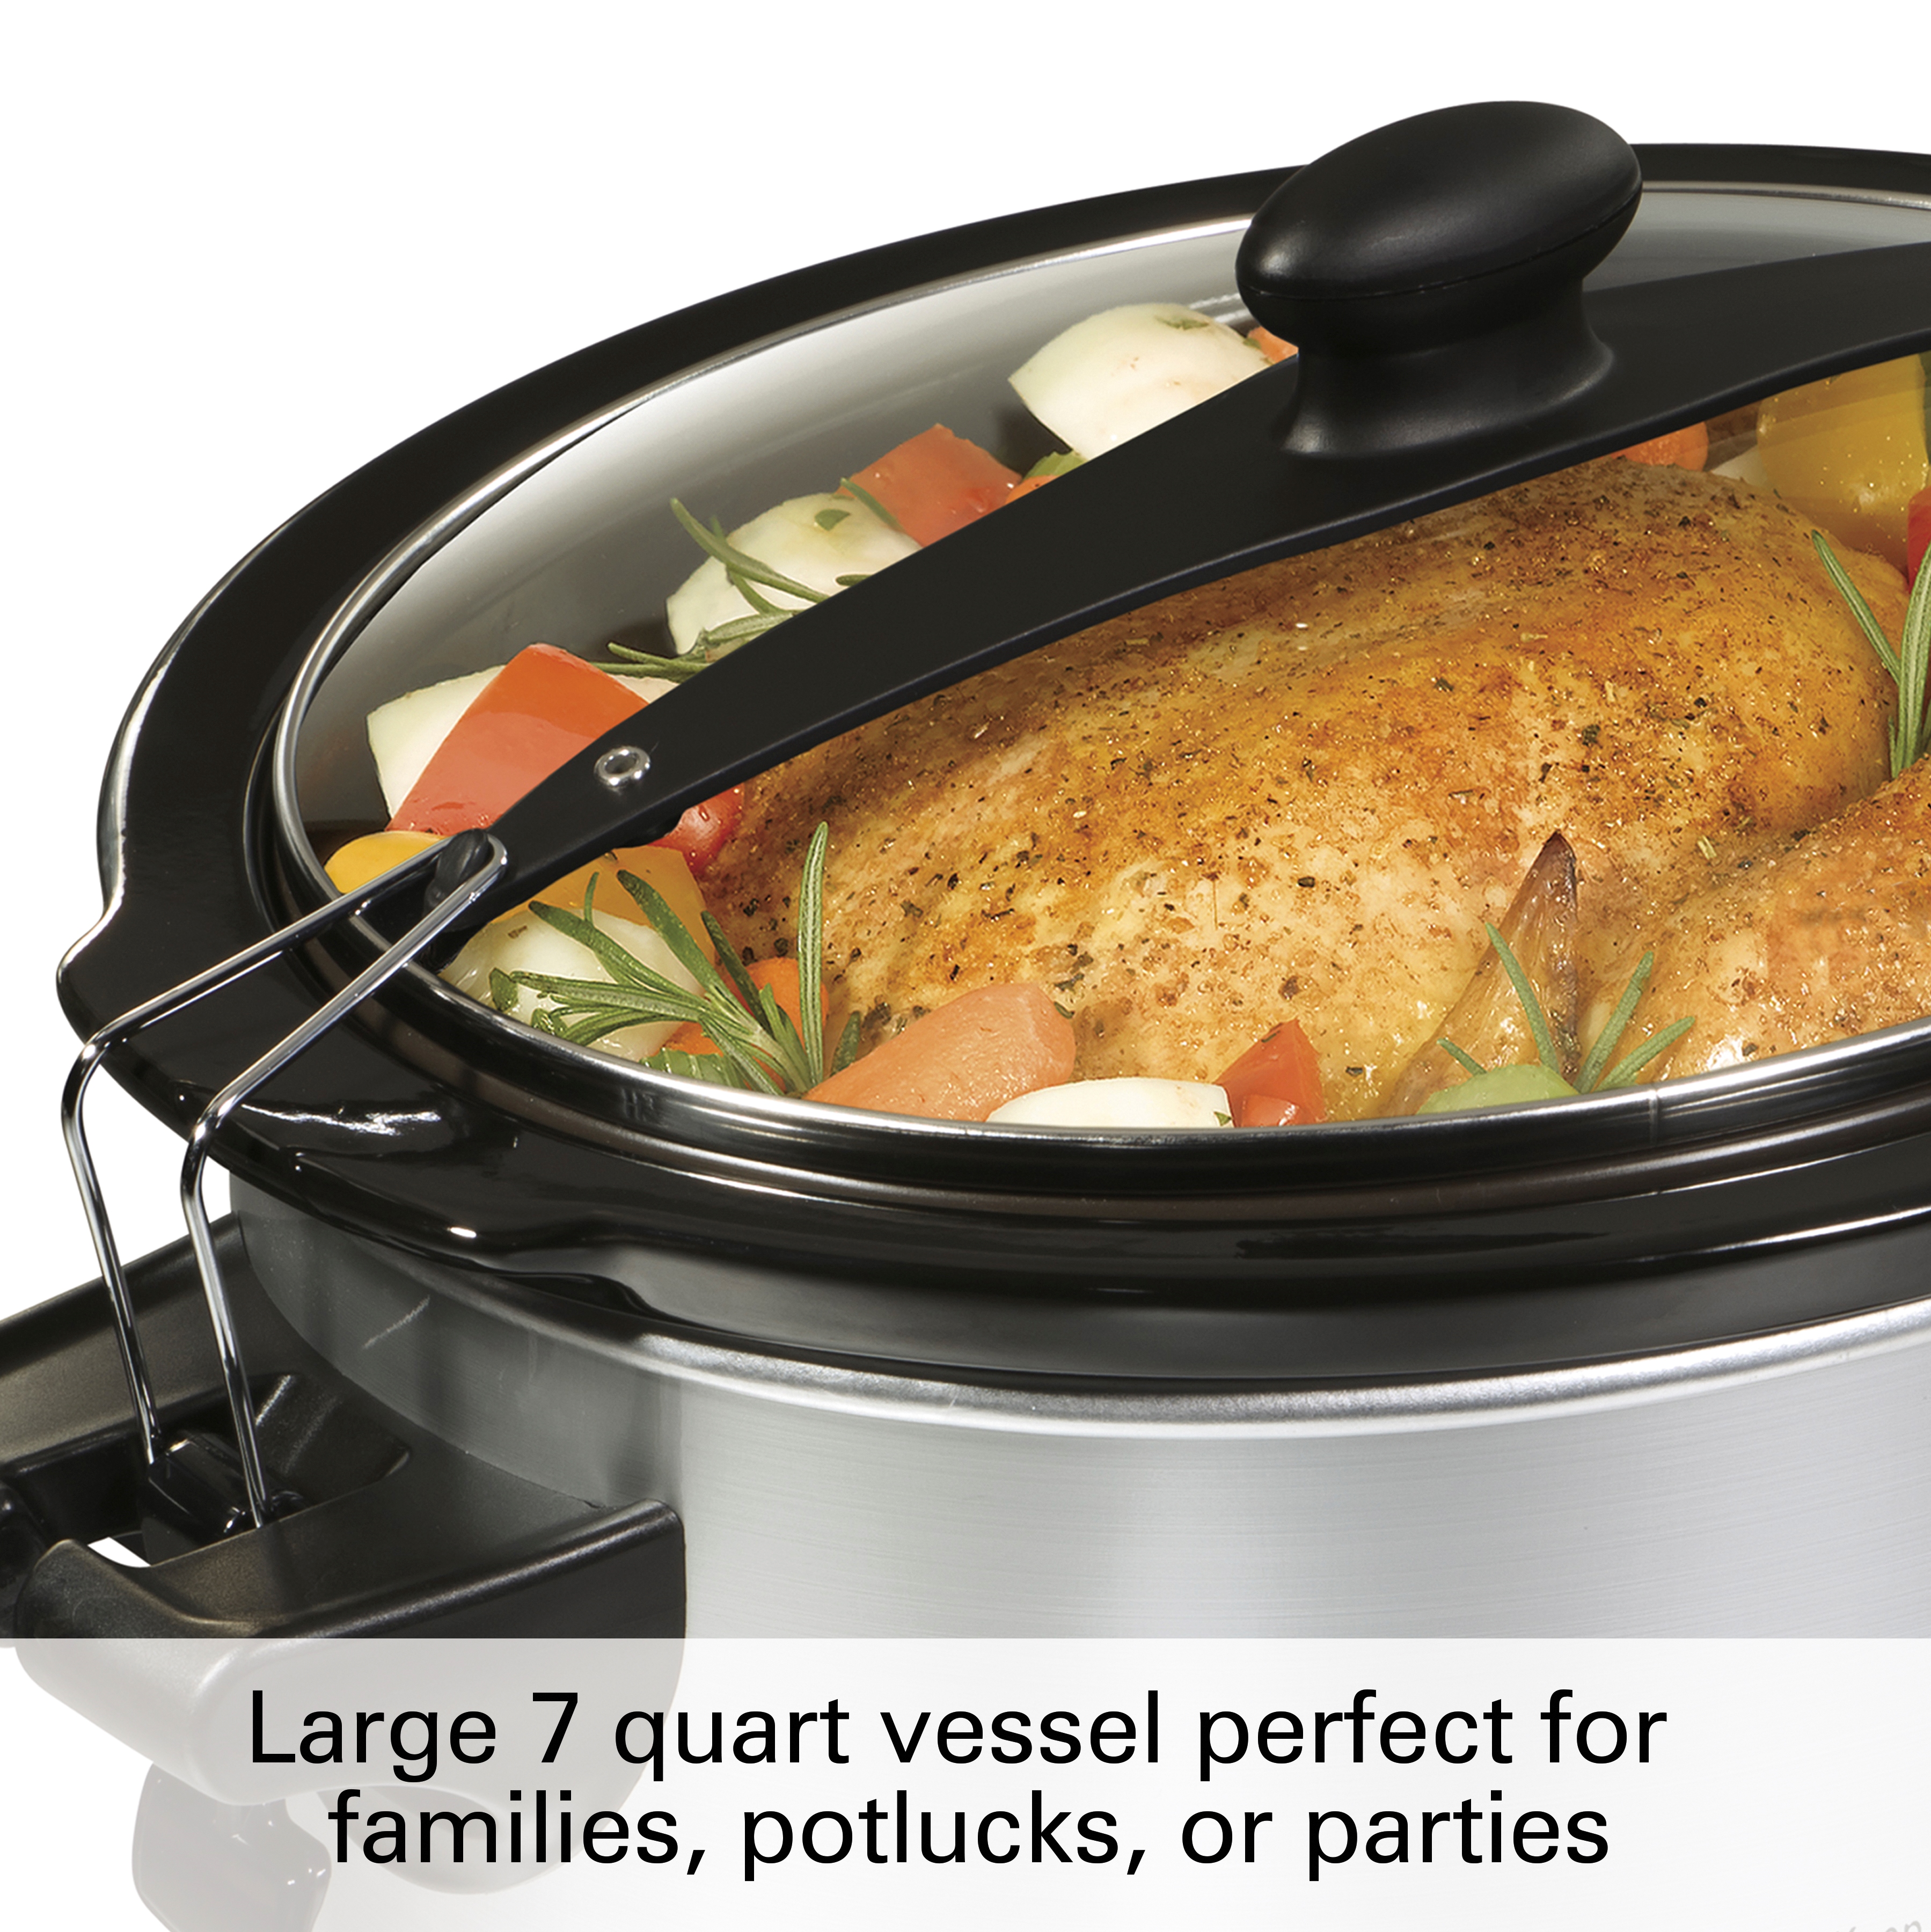 Hamilton Beach Stay or Go Programmable Slow Cooker with Party Dipper, 7 Quart Capacity, Removable Crock, Stainless Steel, 33477 - image 4 of 7